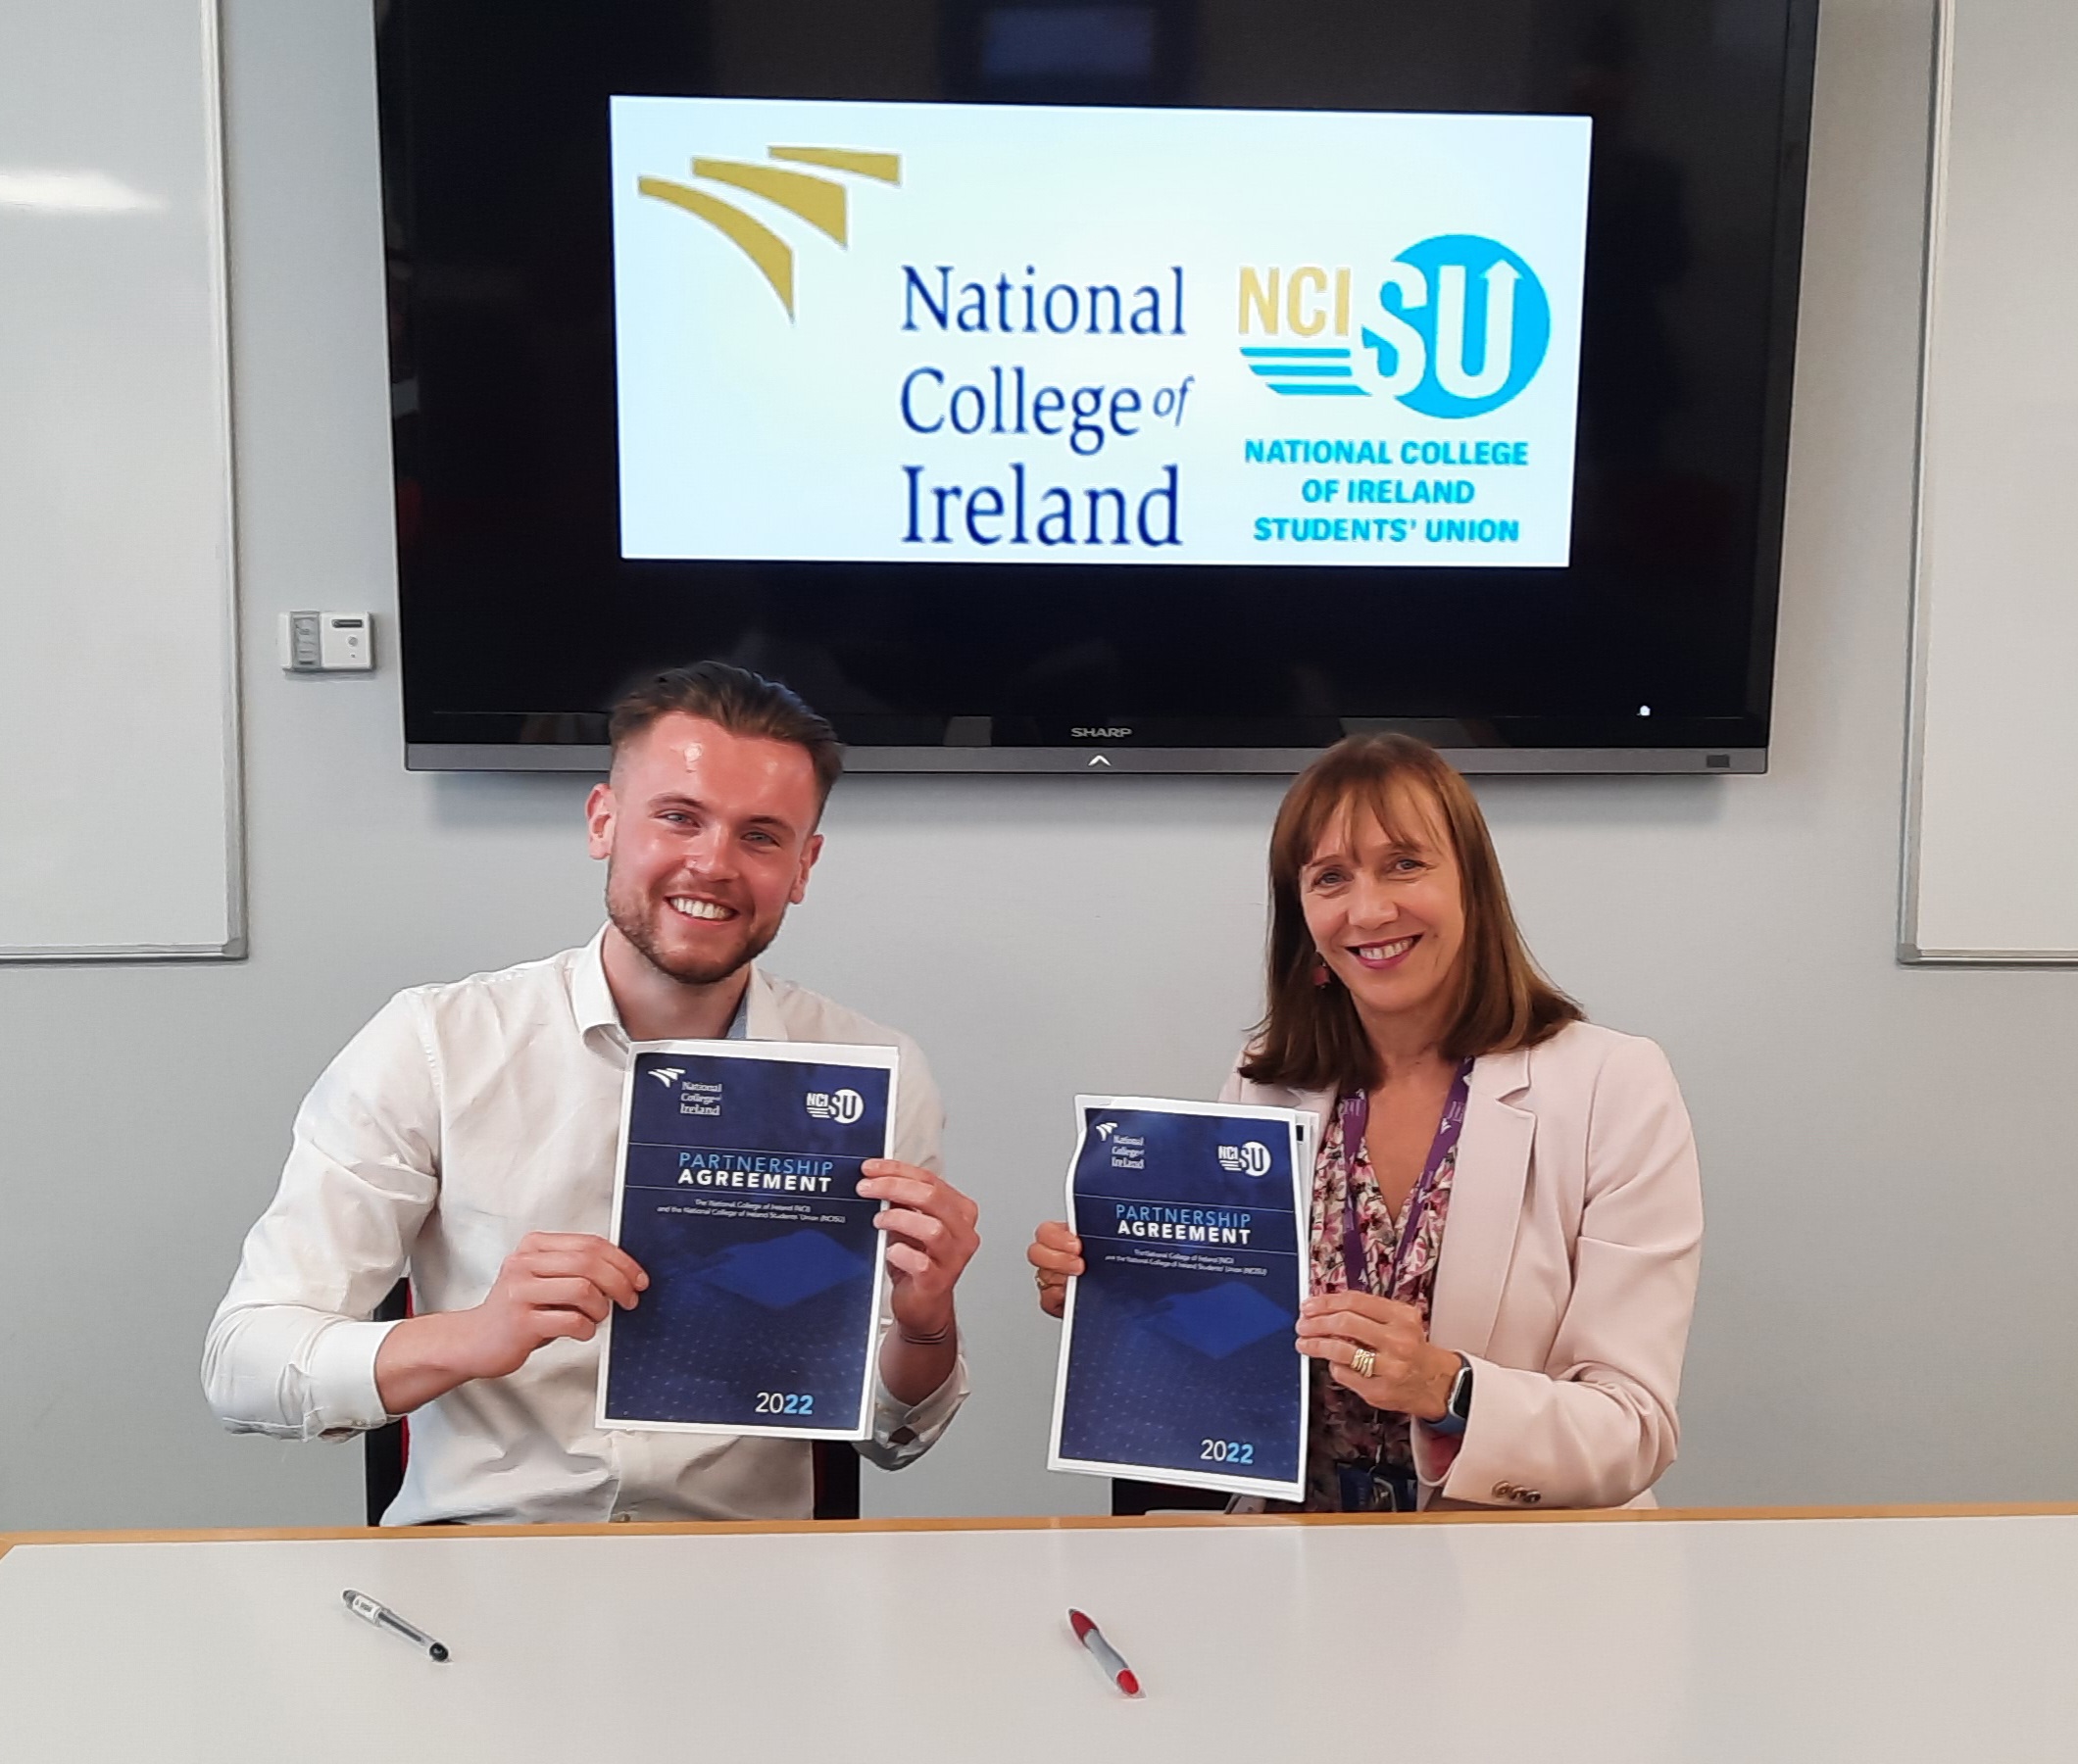 NCISU President Conor O'Reilly 2021/22) and NCI President Gina Quin signing Partnership Agreement